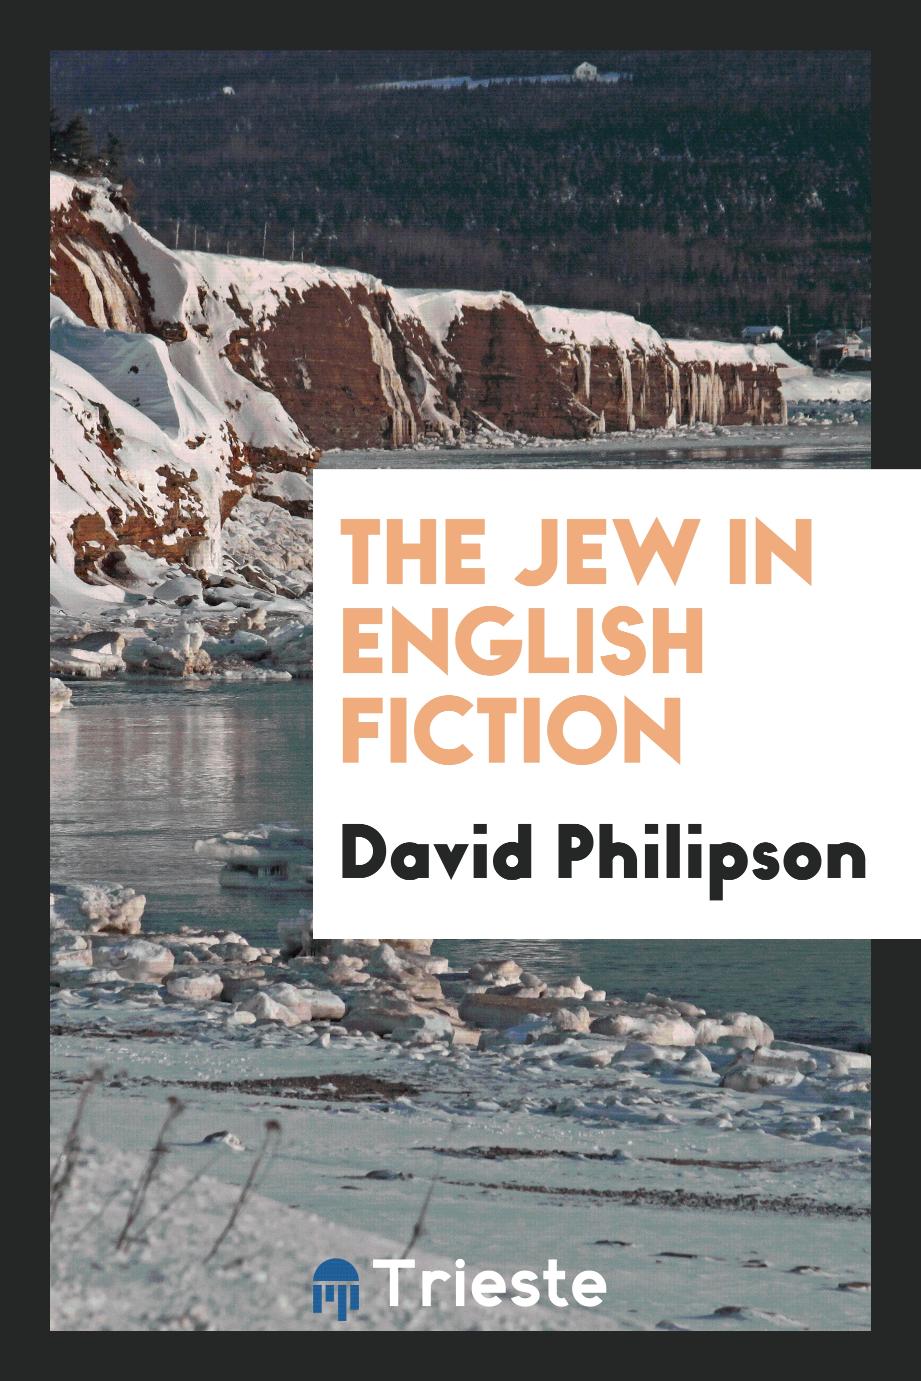 The Jew in English fiction